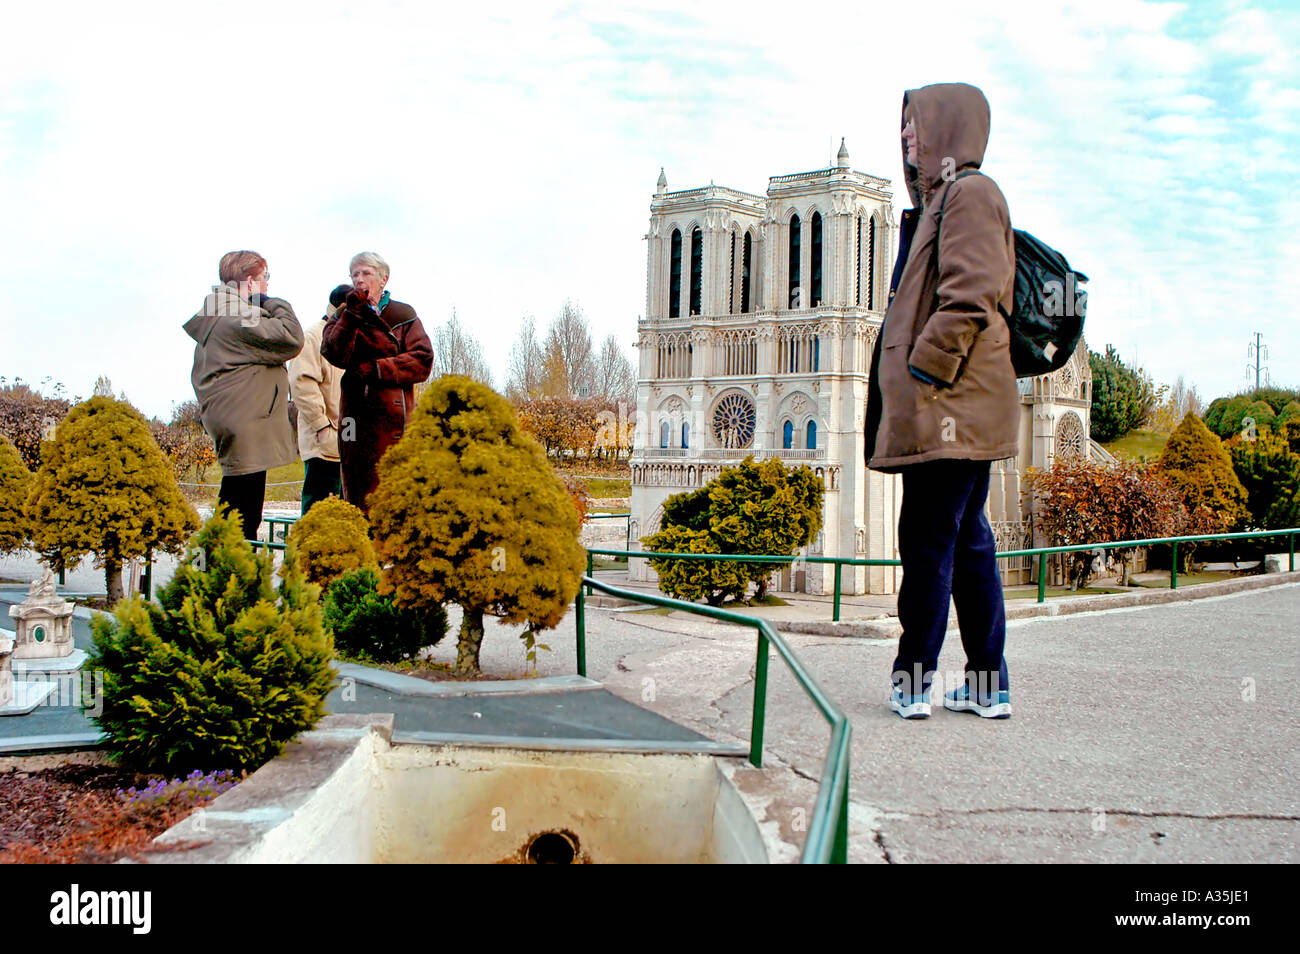 Paris France, Group Women Tourists Visiting 'France Miniature' Theme Park, Architectural Models of French Monuments in Elancourt, autumn and paris Stock Photo